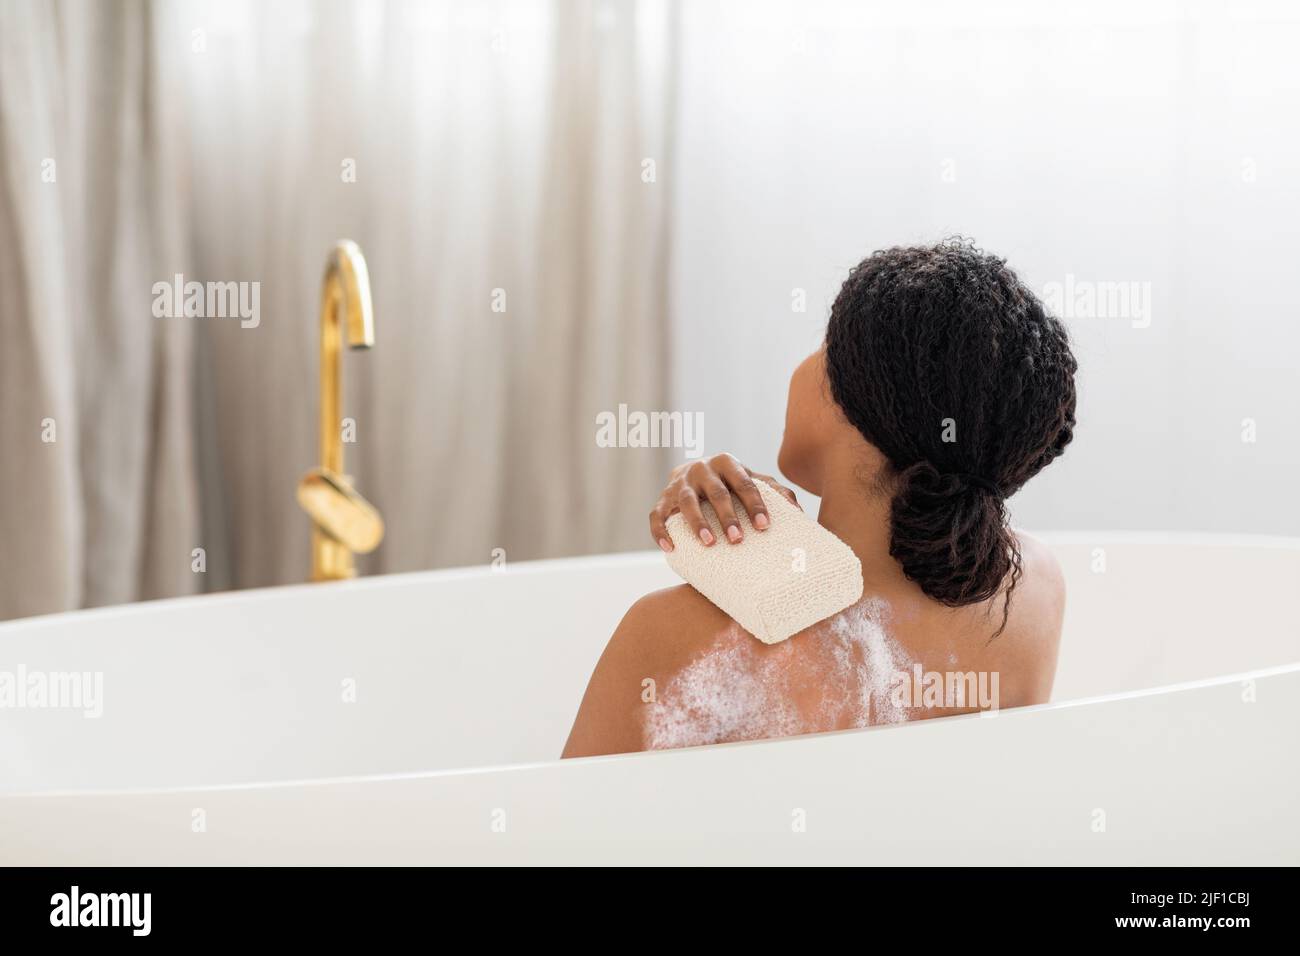 Young Black Lady Washing Herself With Sponge While Taking Bath At Home Stock Photo